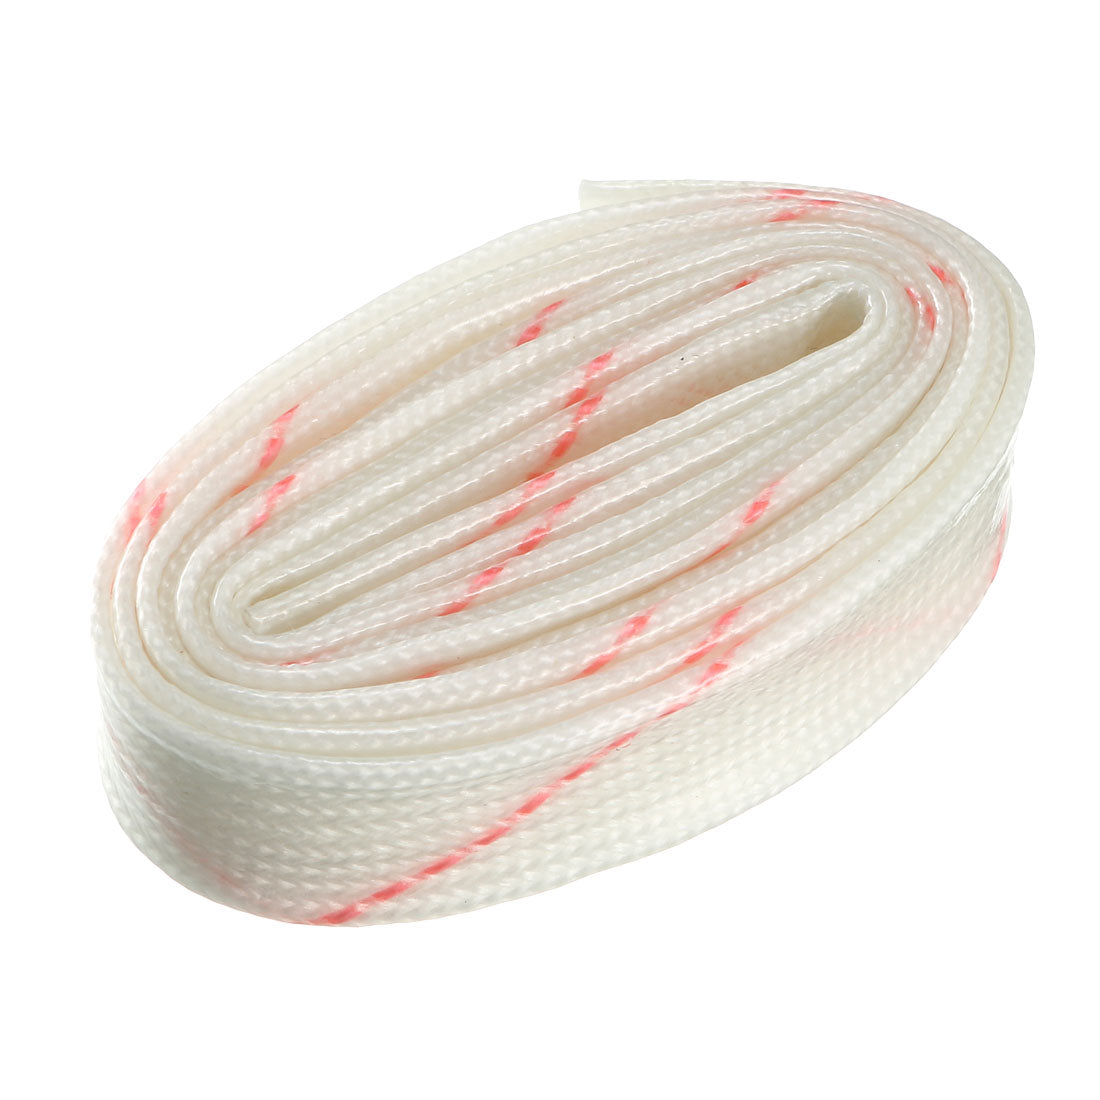 uxcell Uxcell Fiberglass Sleeve 8mm I.D. PVC Insulation Tubing 1500V Tube Adjustable Sleeving Pipe 125 Degree Centigrade Cable Wrap Wire 890mm 2.92ft White and Red